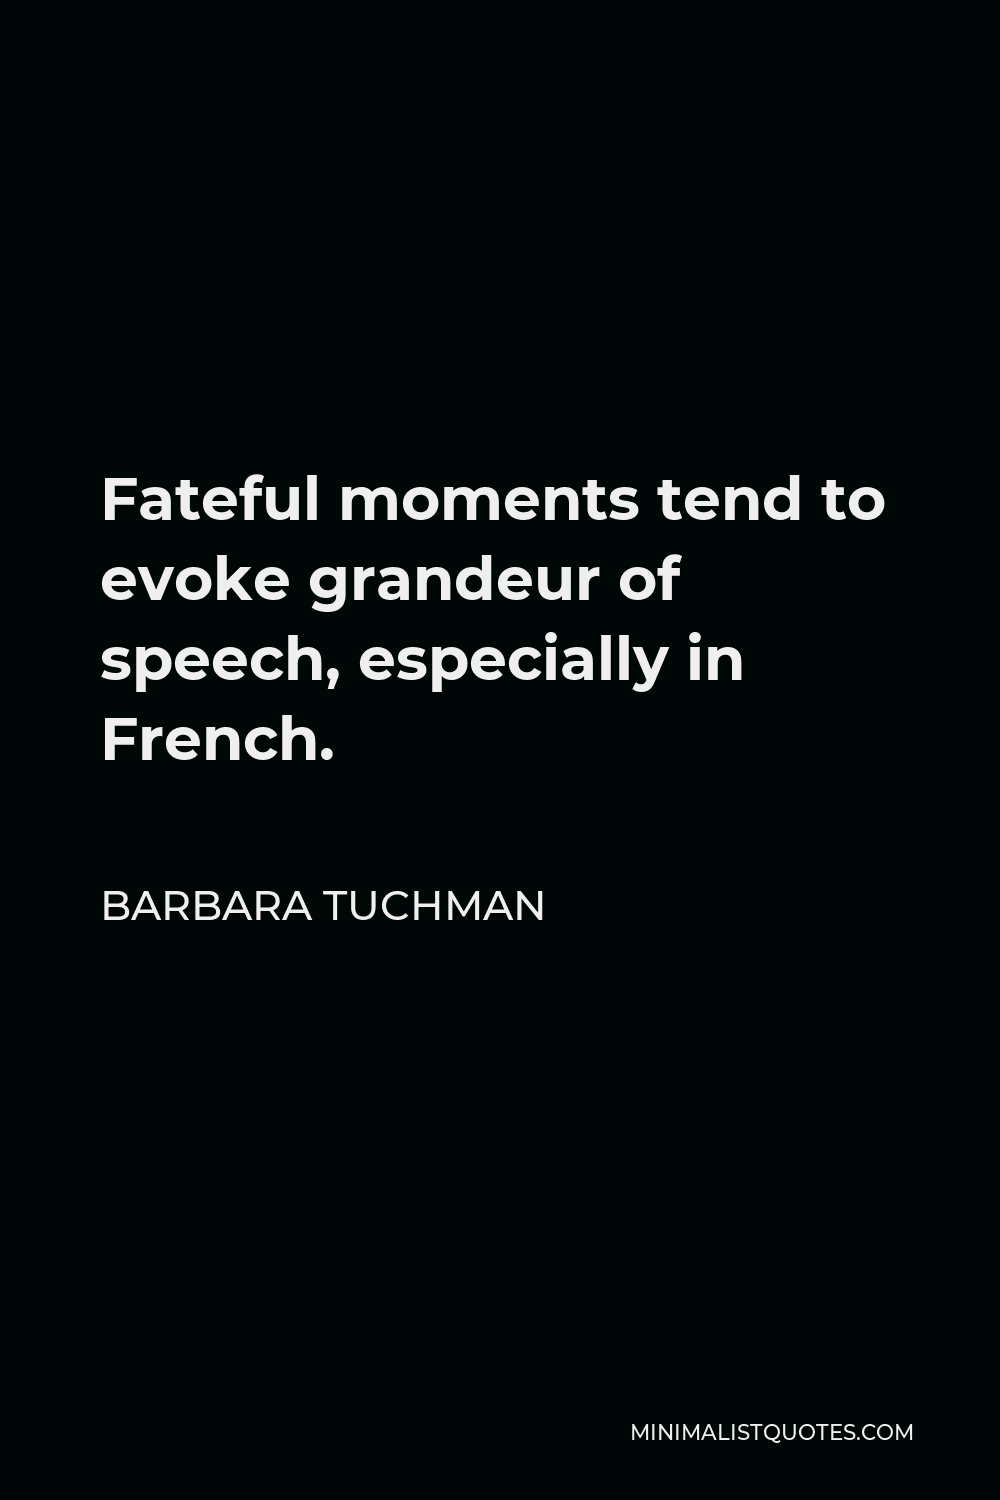 Barbara Tuchman Quote - Fateful moments tend to evoke grandeur of speech, especially in French.